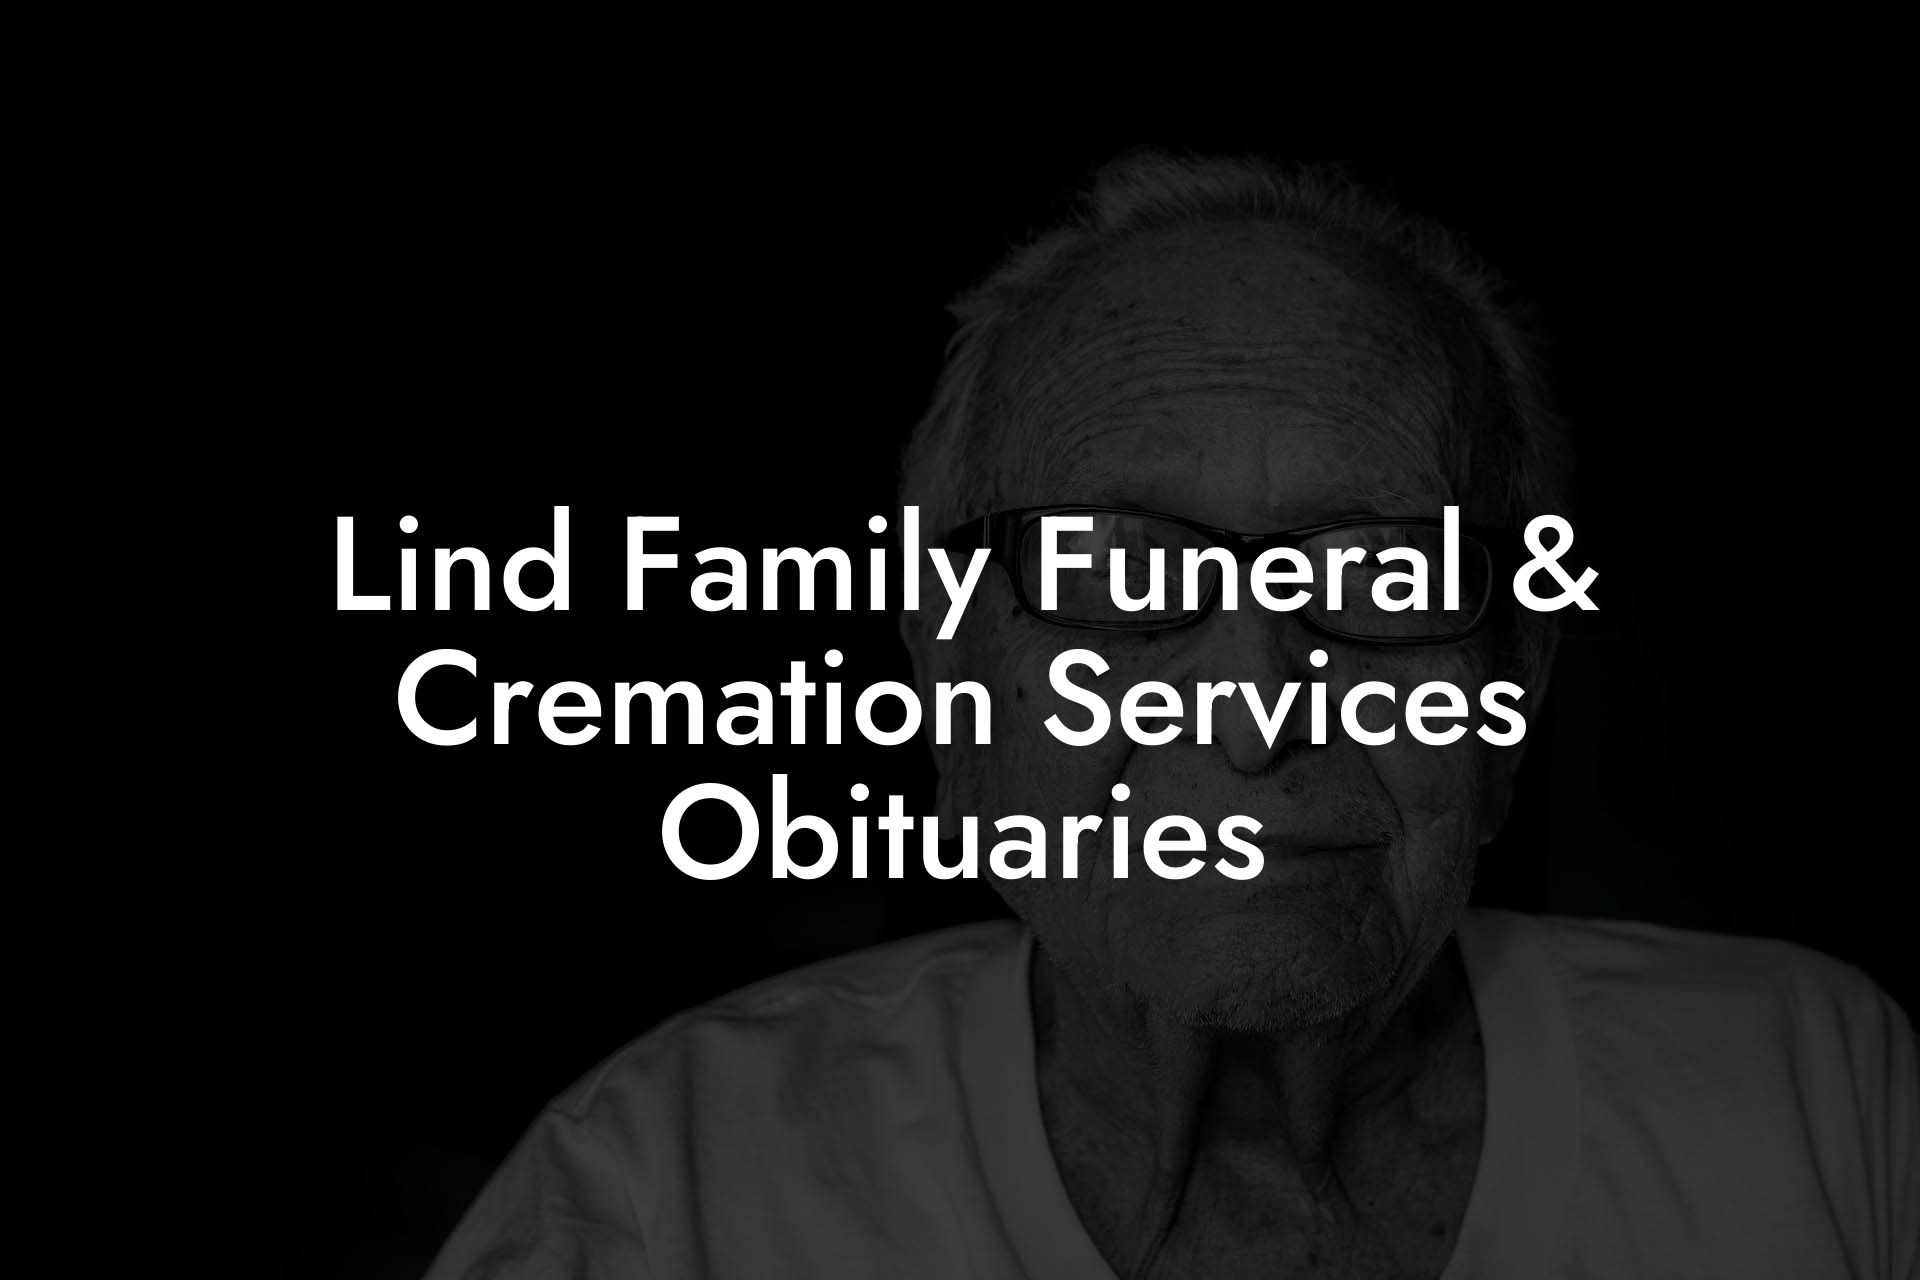 Lind Family Funeral & Cremation Services Obituaries